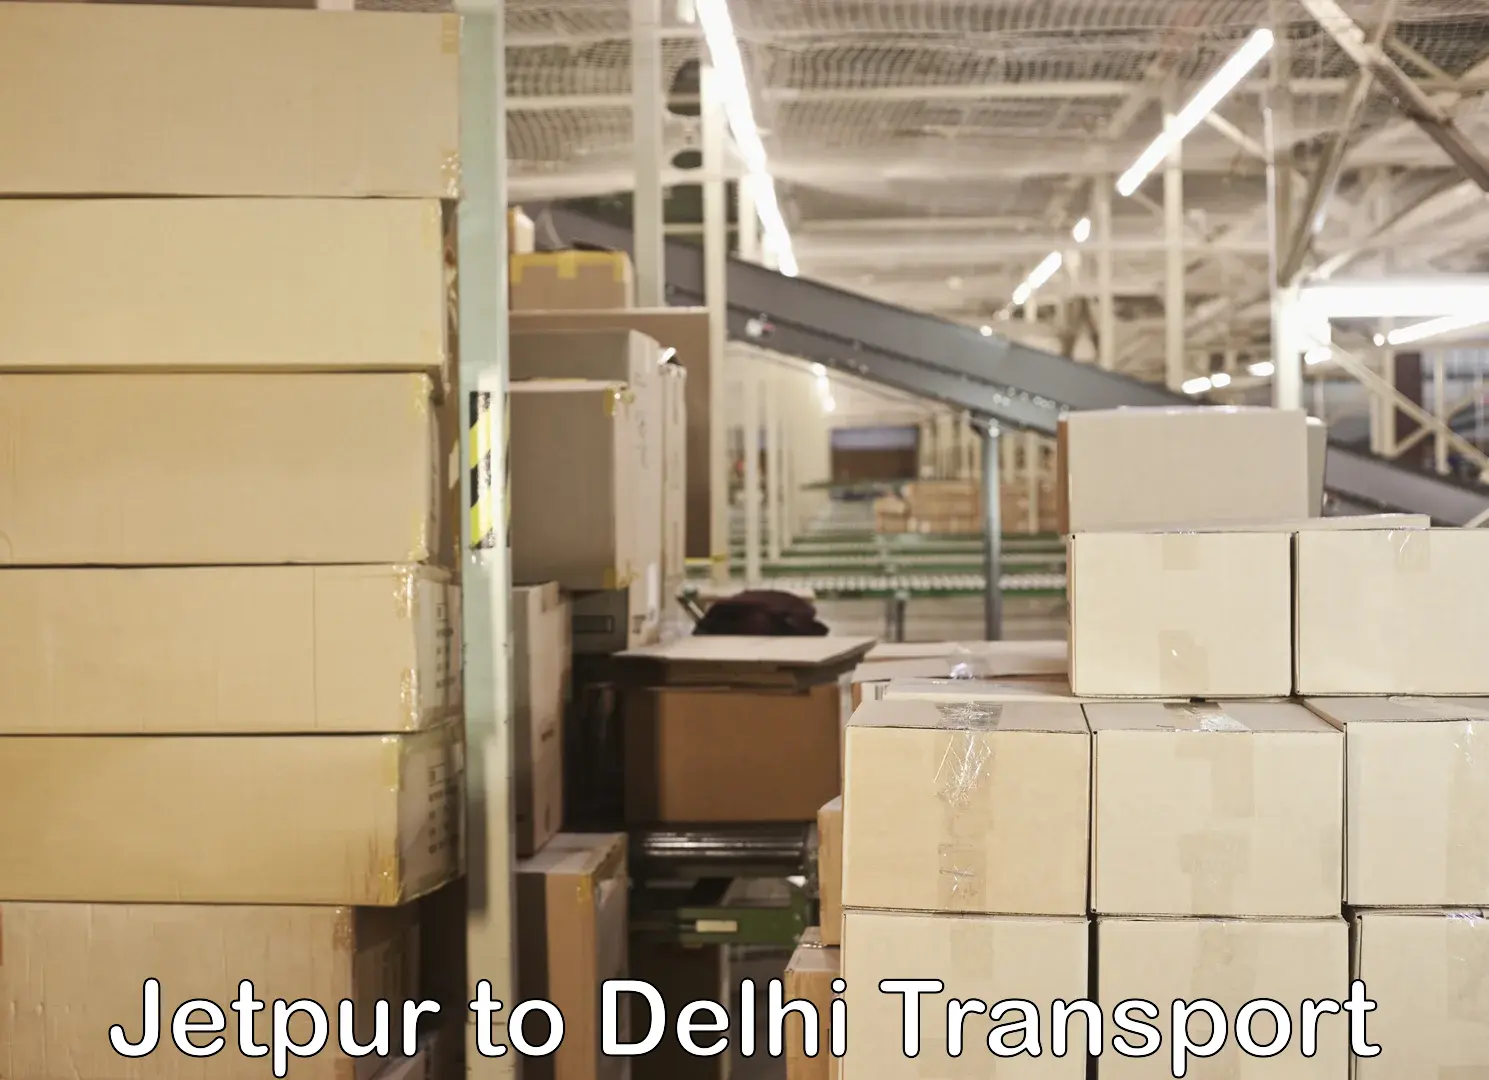 Transport bike from one state to another Jetpur to Delhi